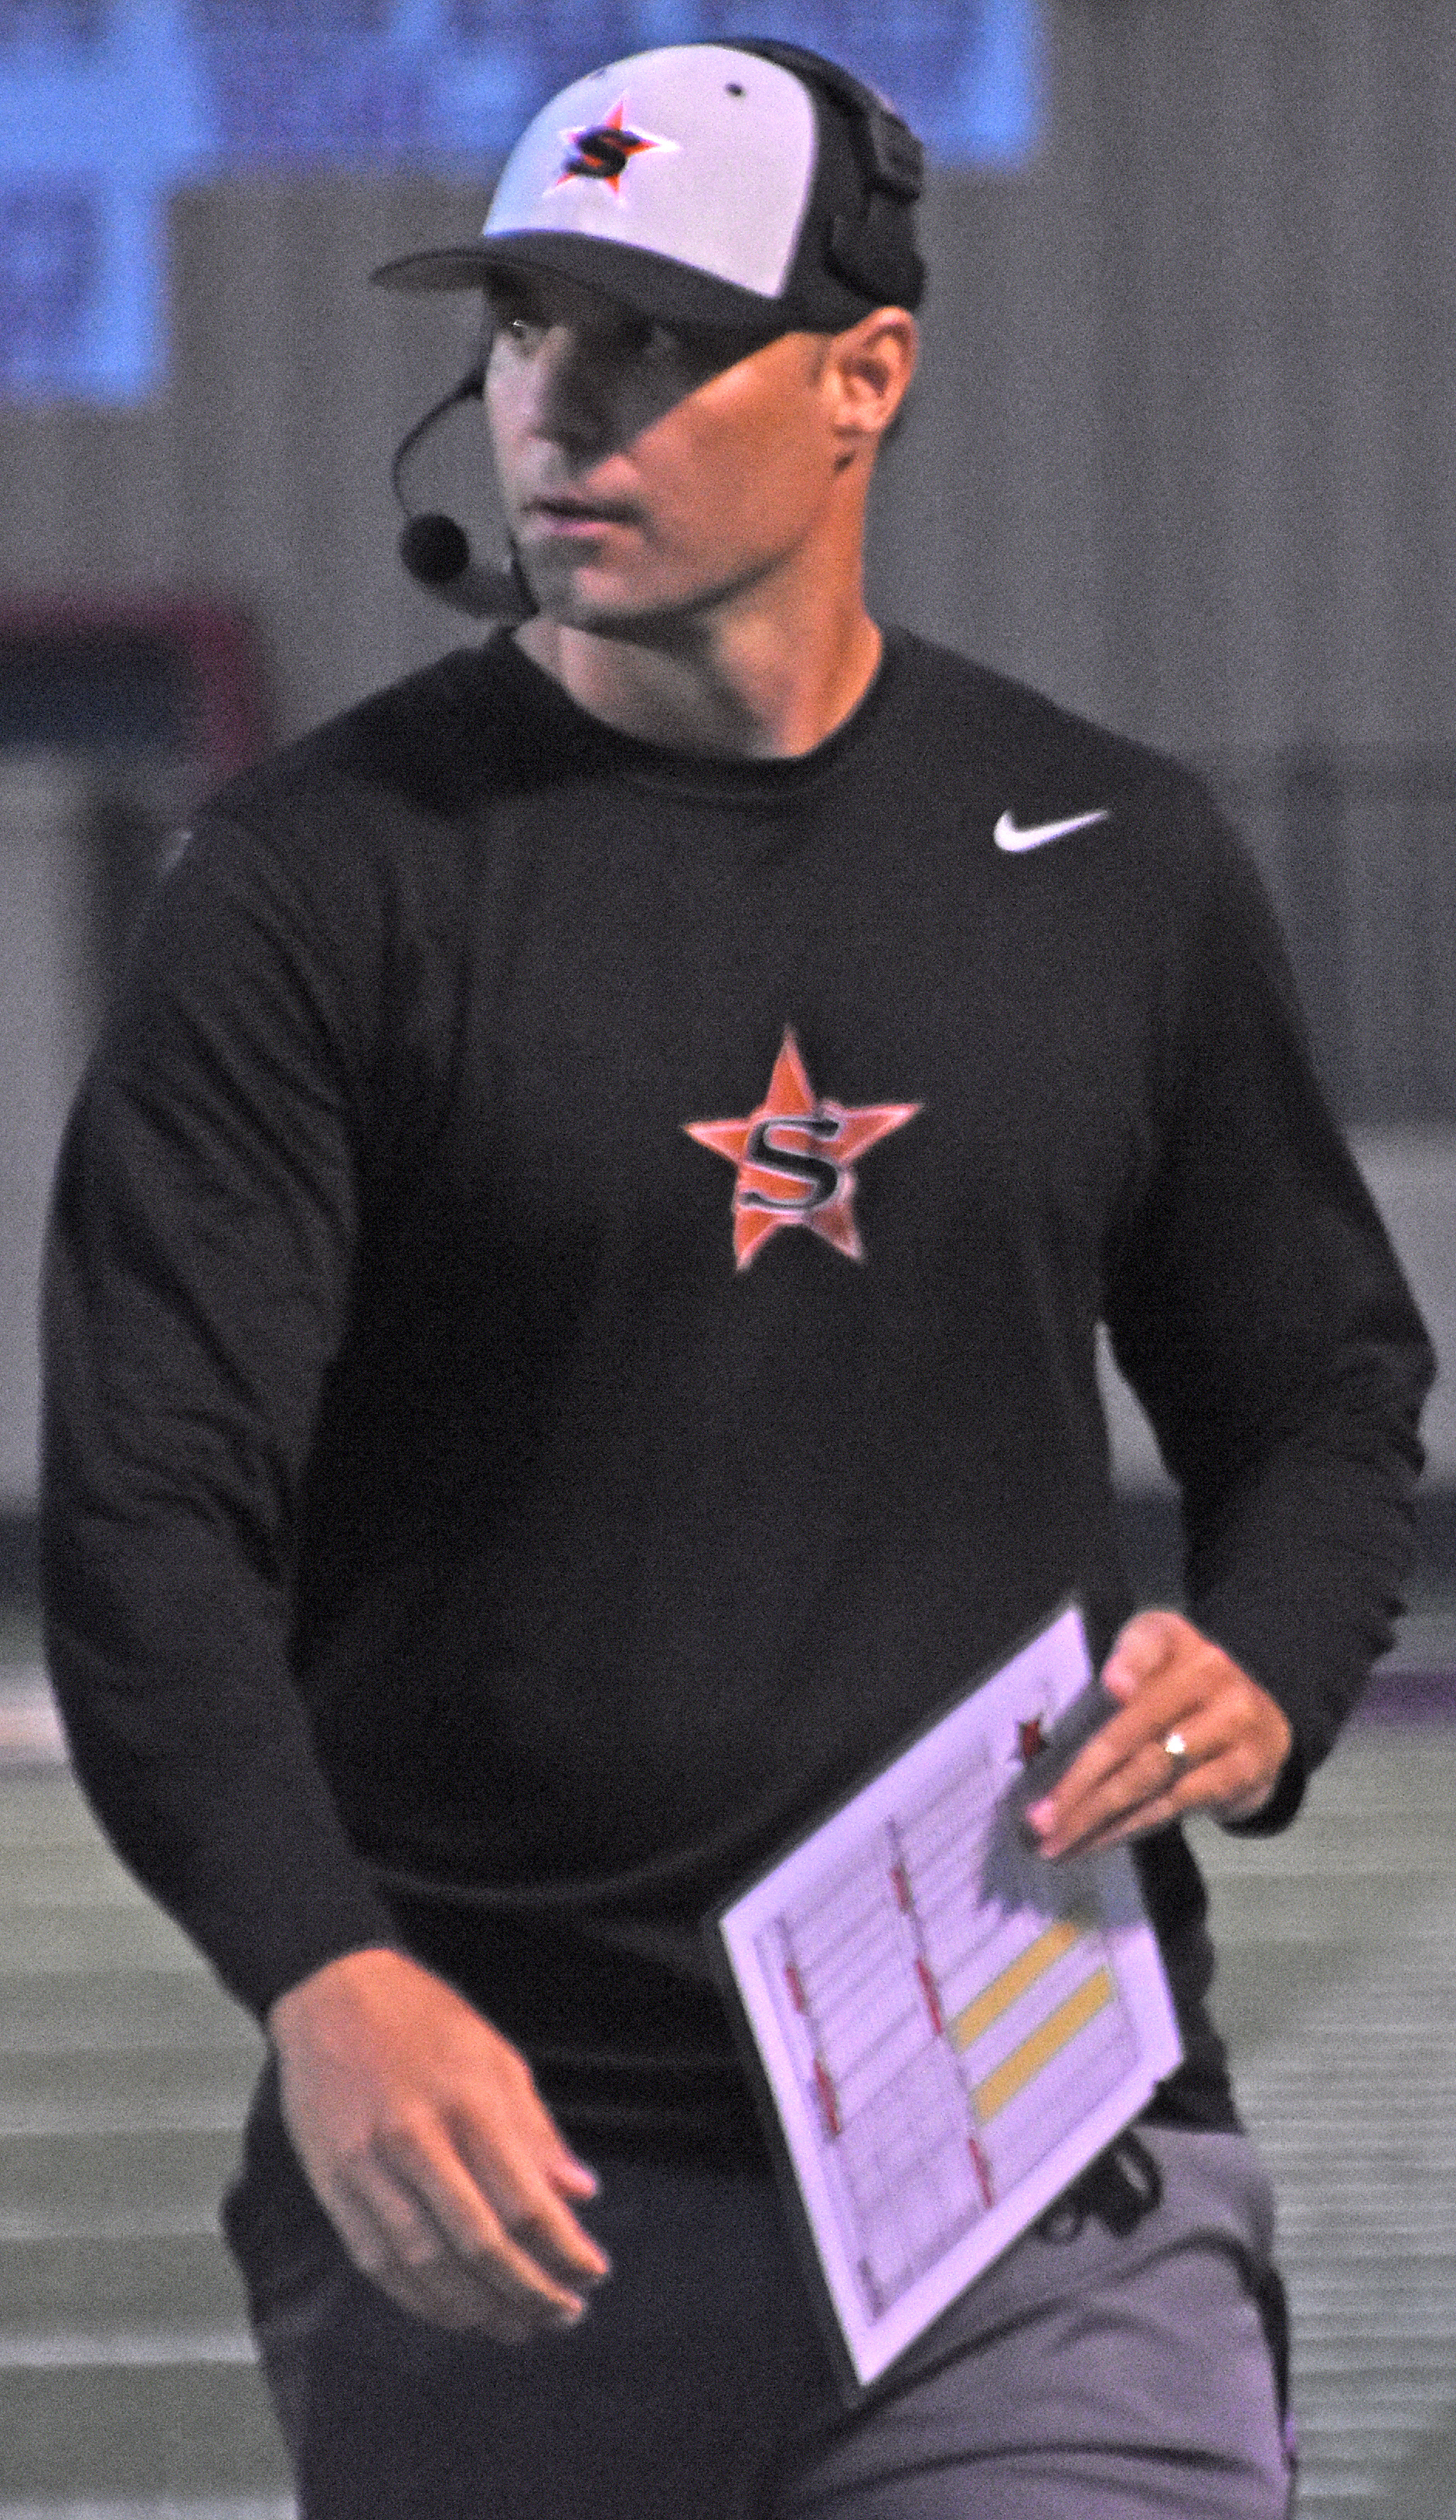 Coach Mike Volarvich watches the Scrappers in action Friday night at Fountain Lake. Volarvich said the Scrappers overcame some early adversity and came away with ‘a good victory.’ Nashville’s next opponent will be Joe T. Robinson Friday night.